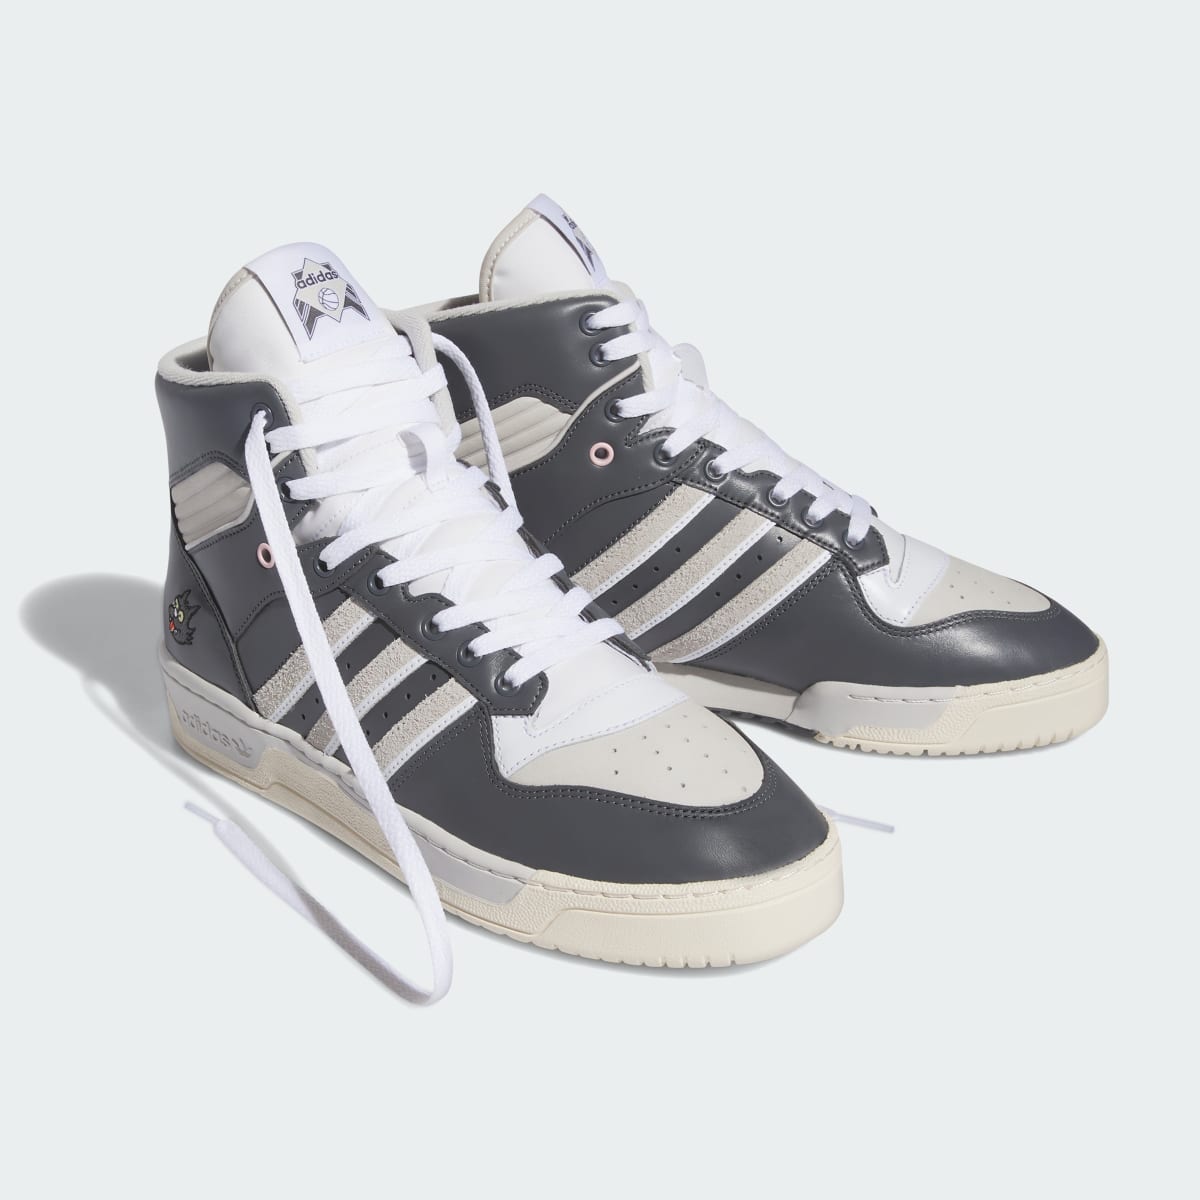 Adidas Rivalry High Scratchy. 7